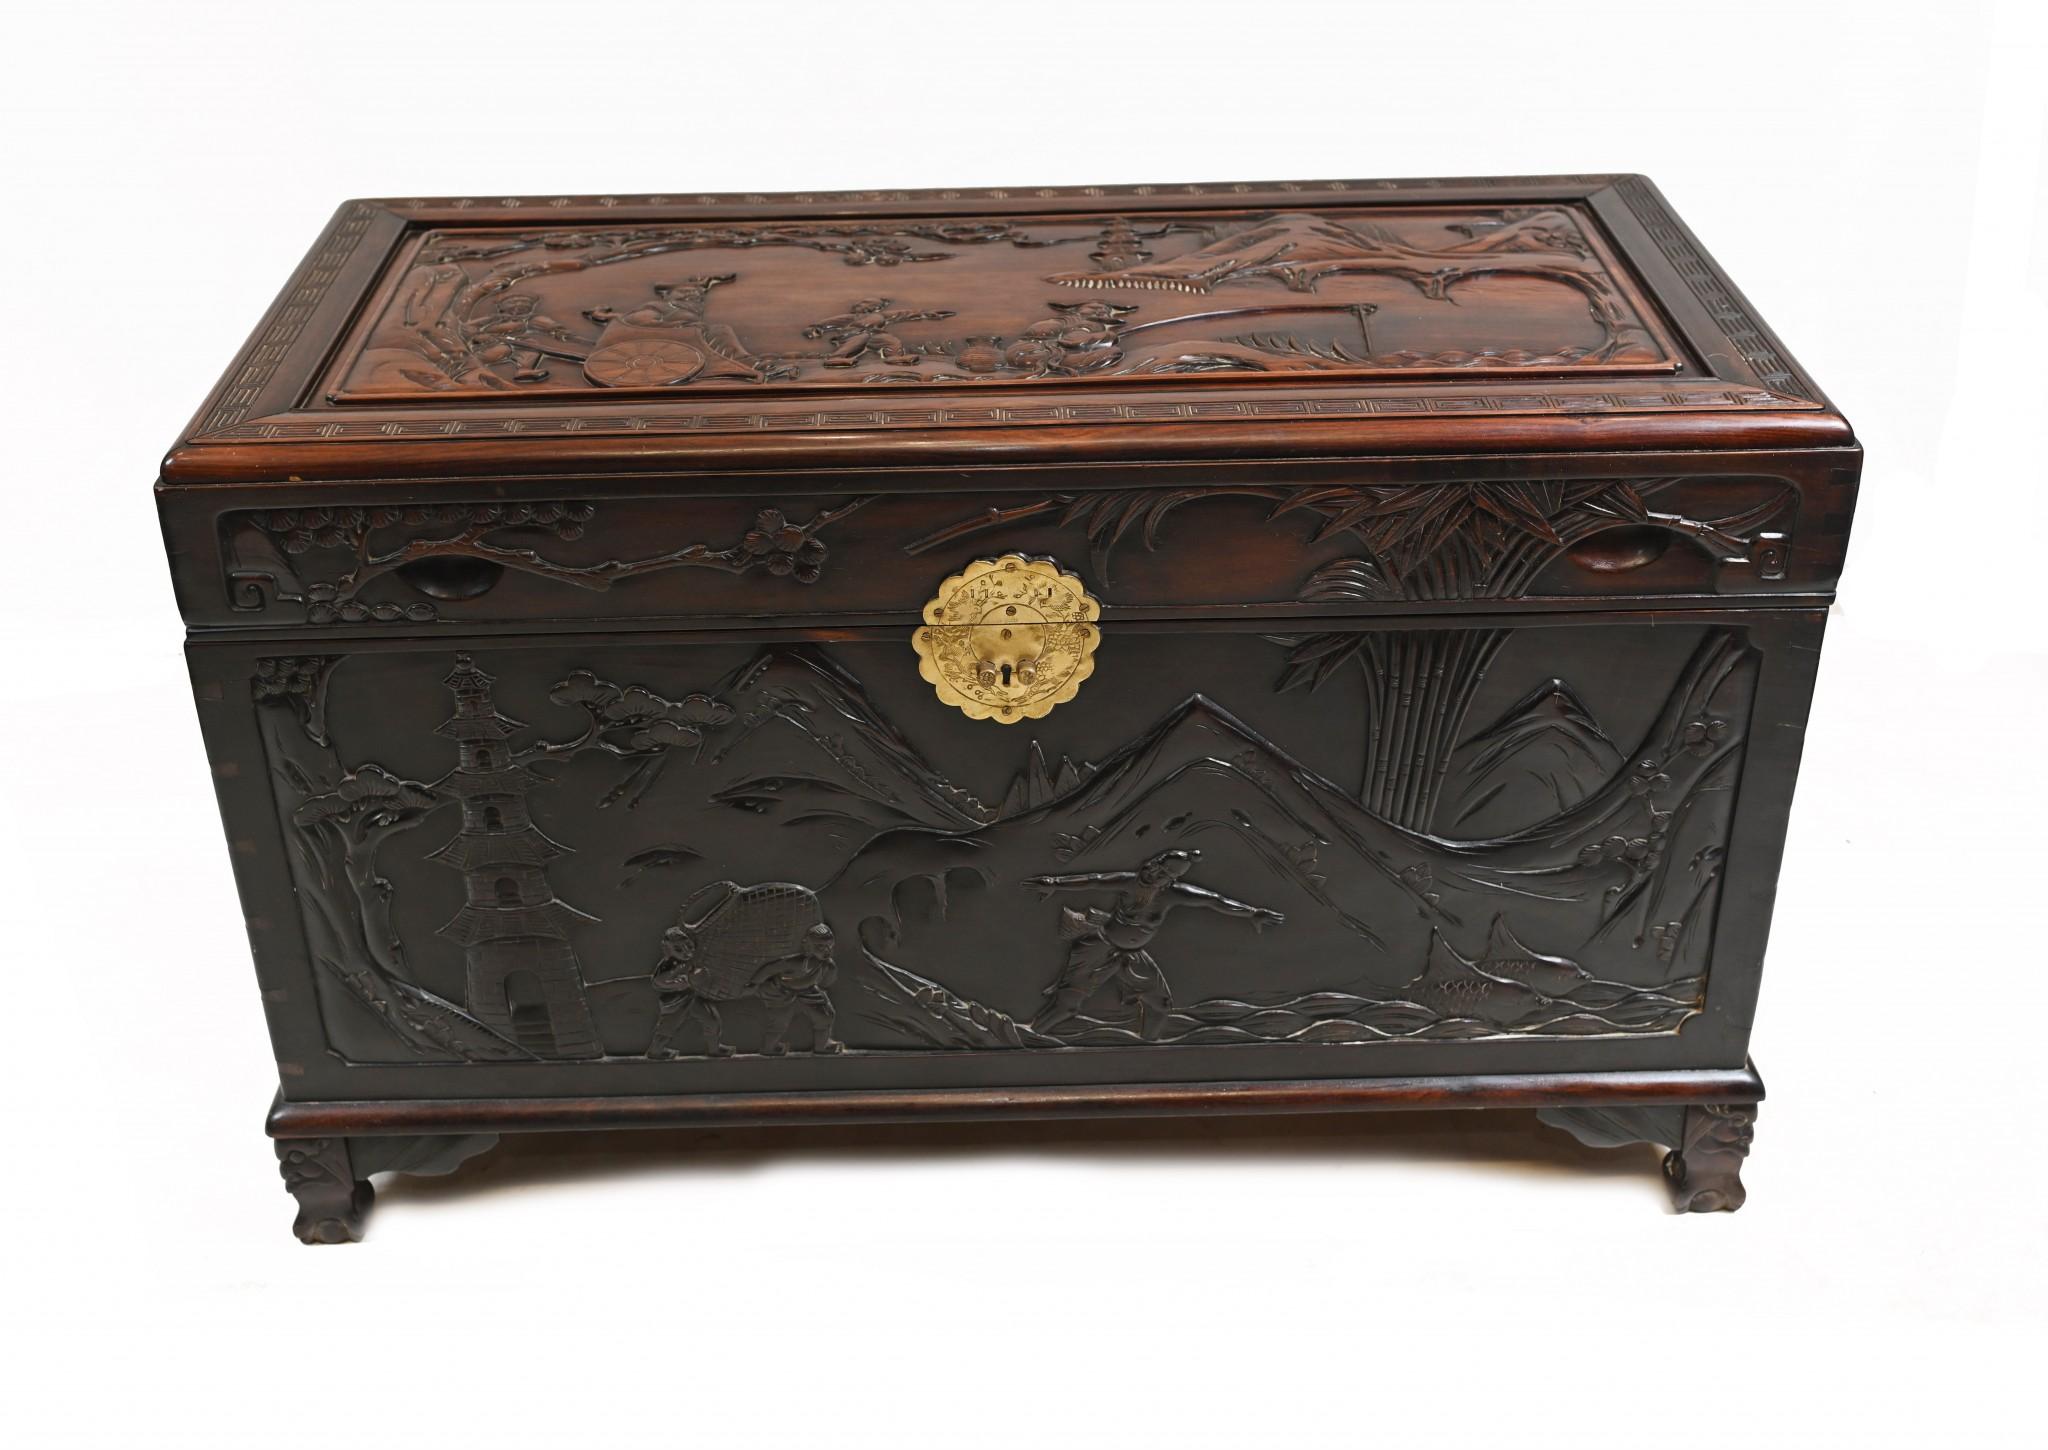 Chinese Camphor Chest Hardwood Carved Luggage Box 1880 1